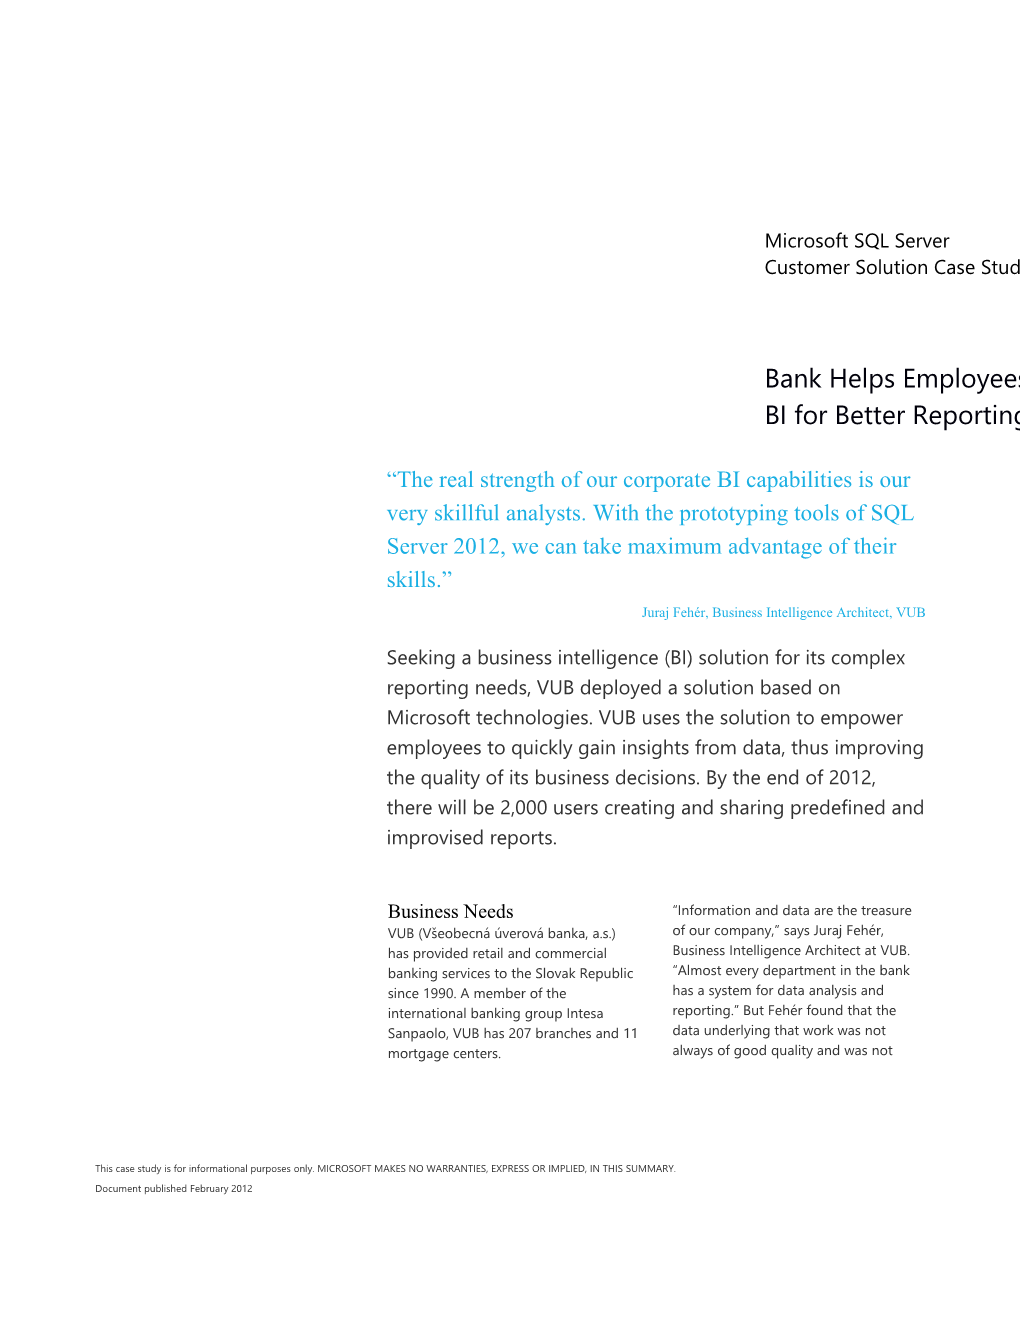 Bank Helps Employees Generate Self-Service BI for Better Reporting and Decision Making